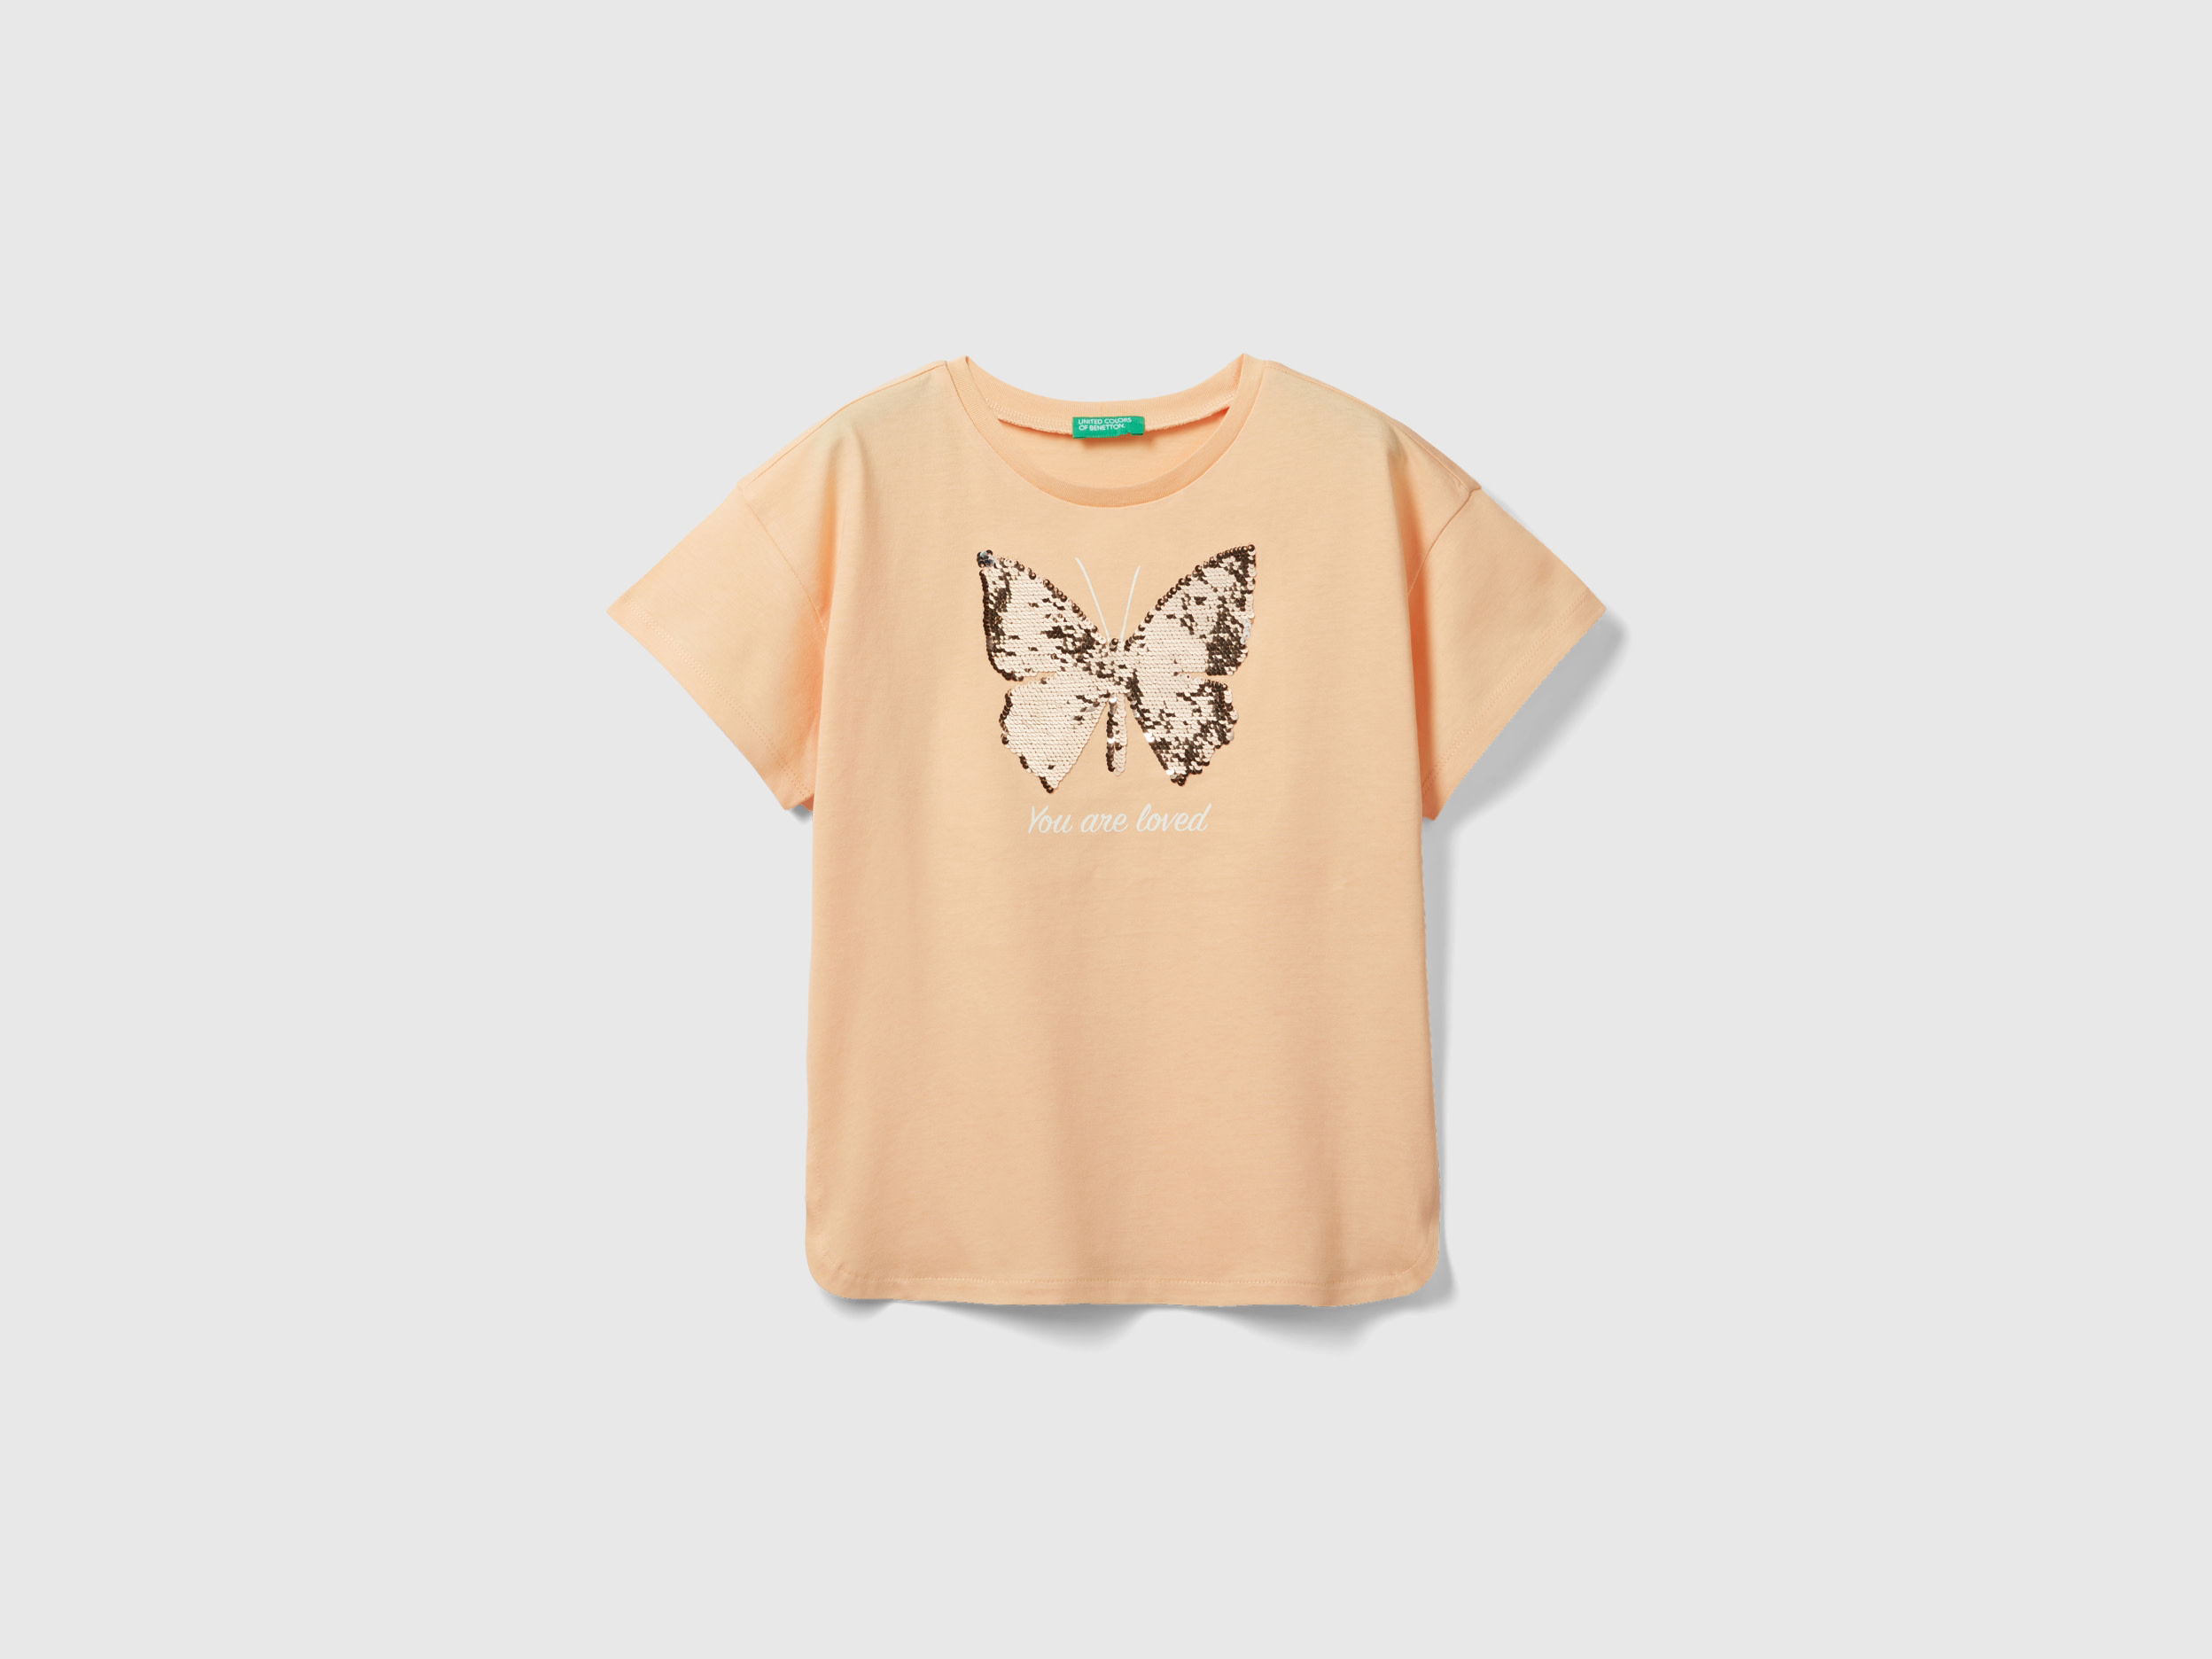 Image of Benetton, T-shirt With Reversible Sequins, size XL, Peach, Kids